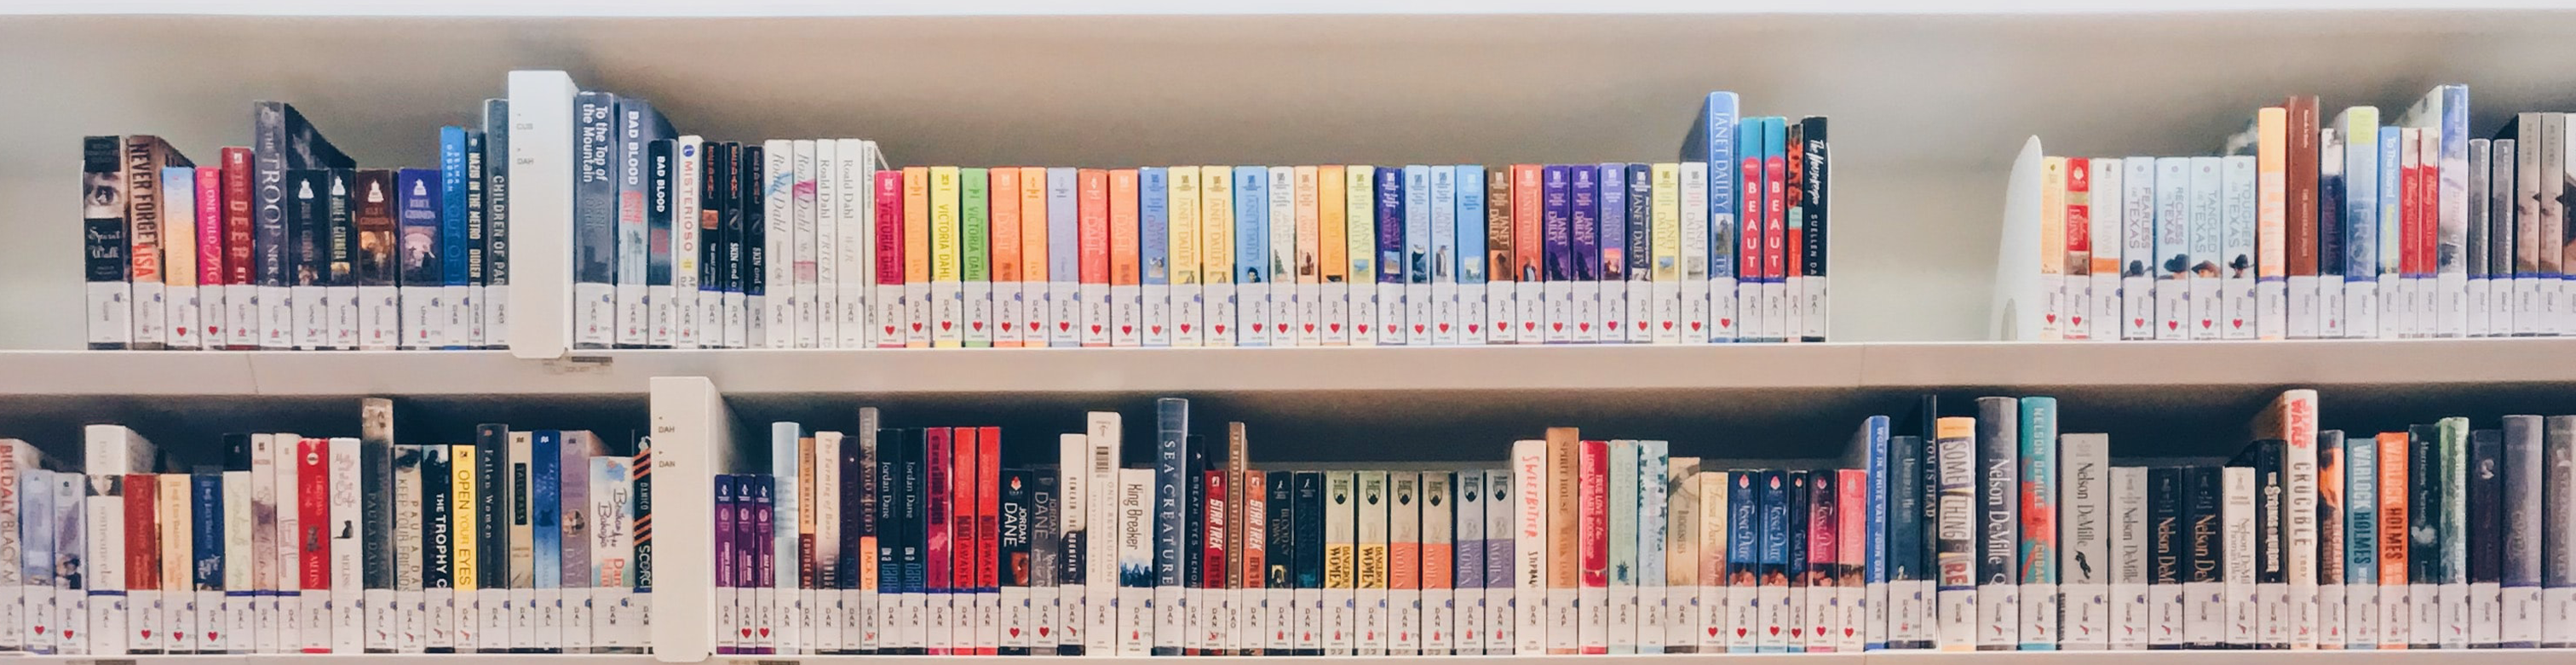 A wall of bookshelves in a book store. The shelves are lines with colorful books, they all have visible subject codes taped to the spines.